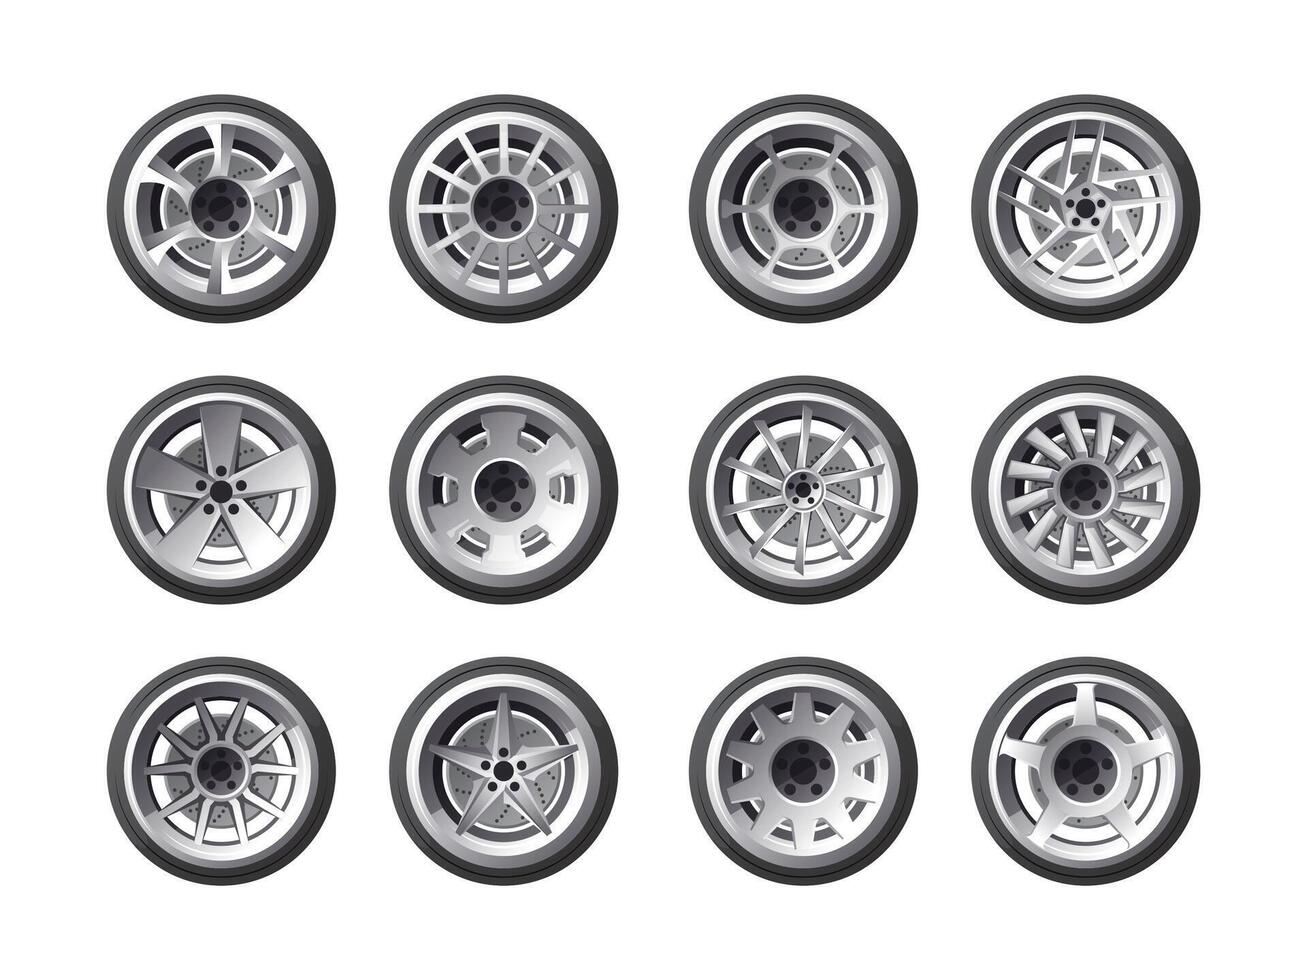 Cartoon car wheels. Round car wheels with tyre rubber and rims, automobile cast, steel, light alloy and aluminum wheels. Vector isolated set